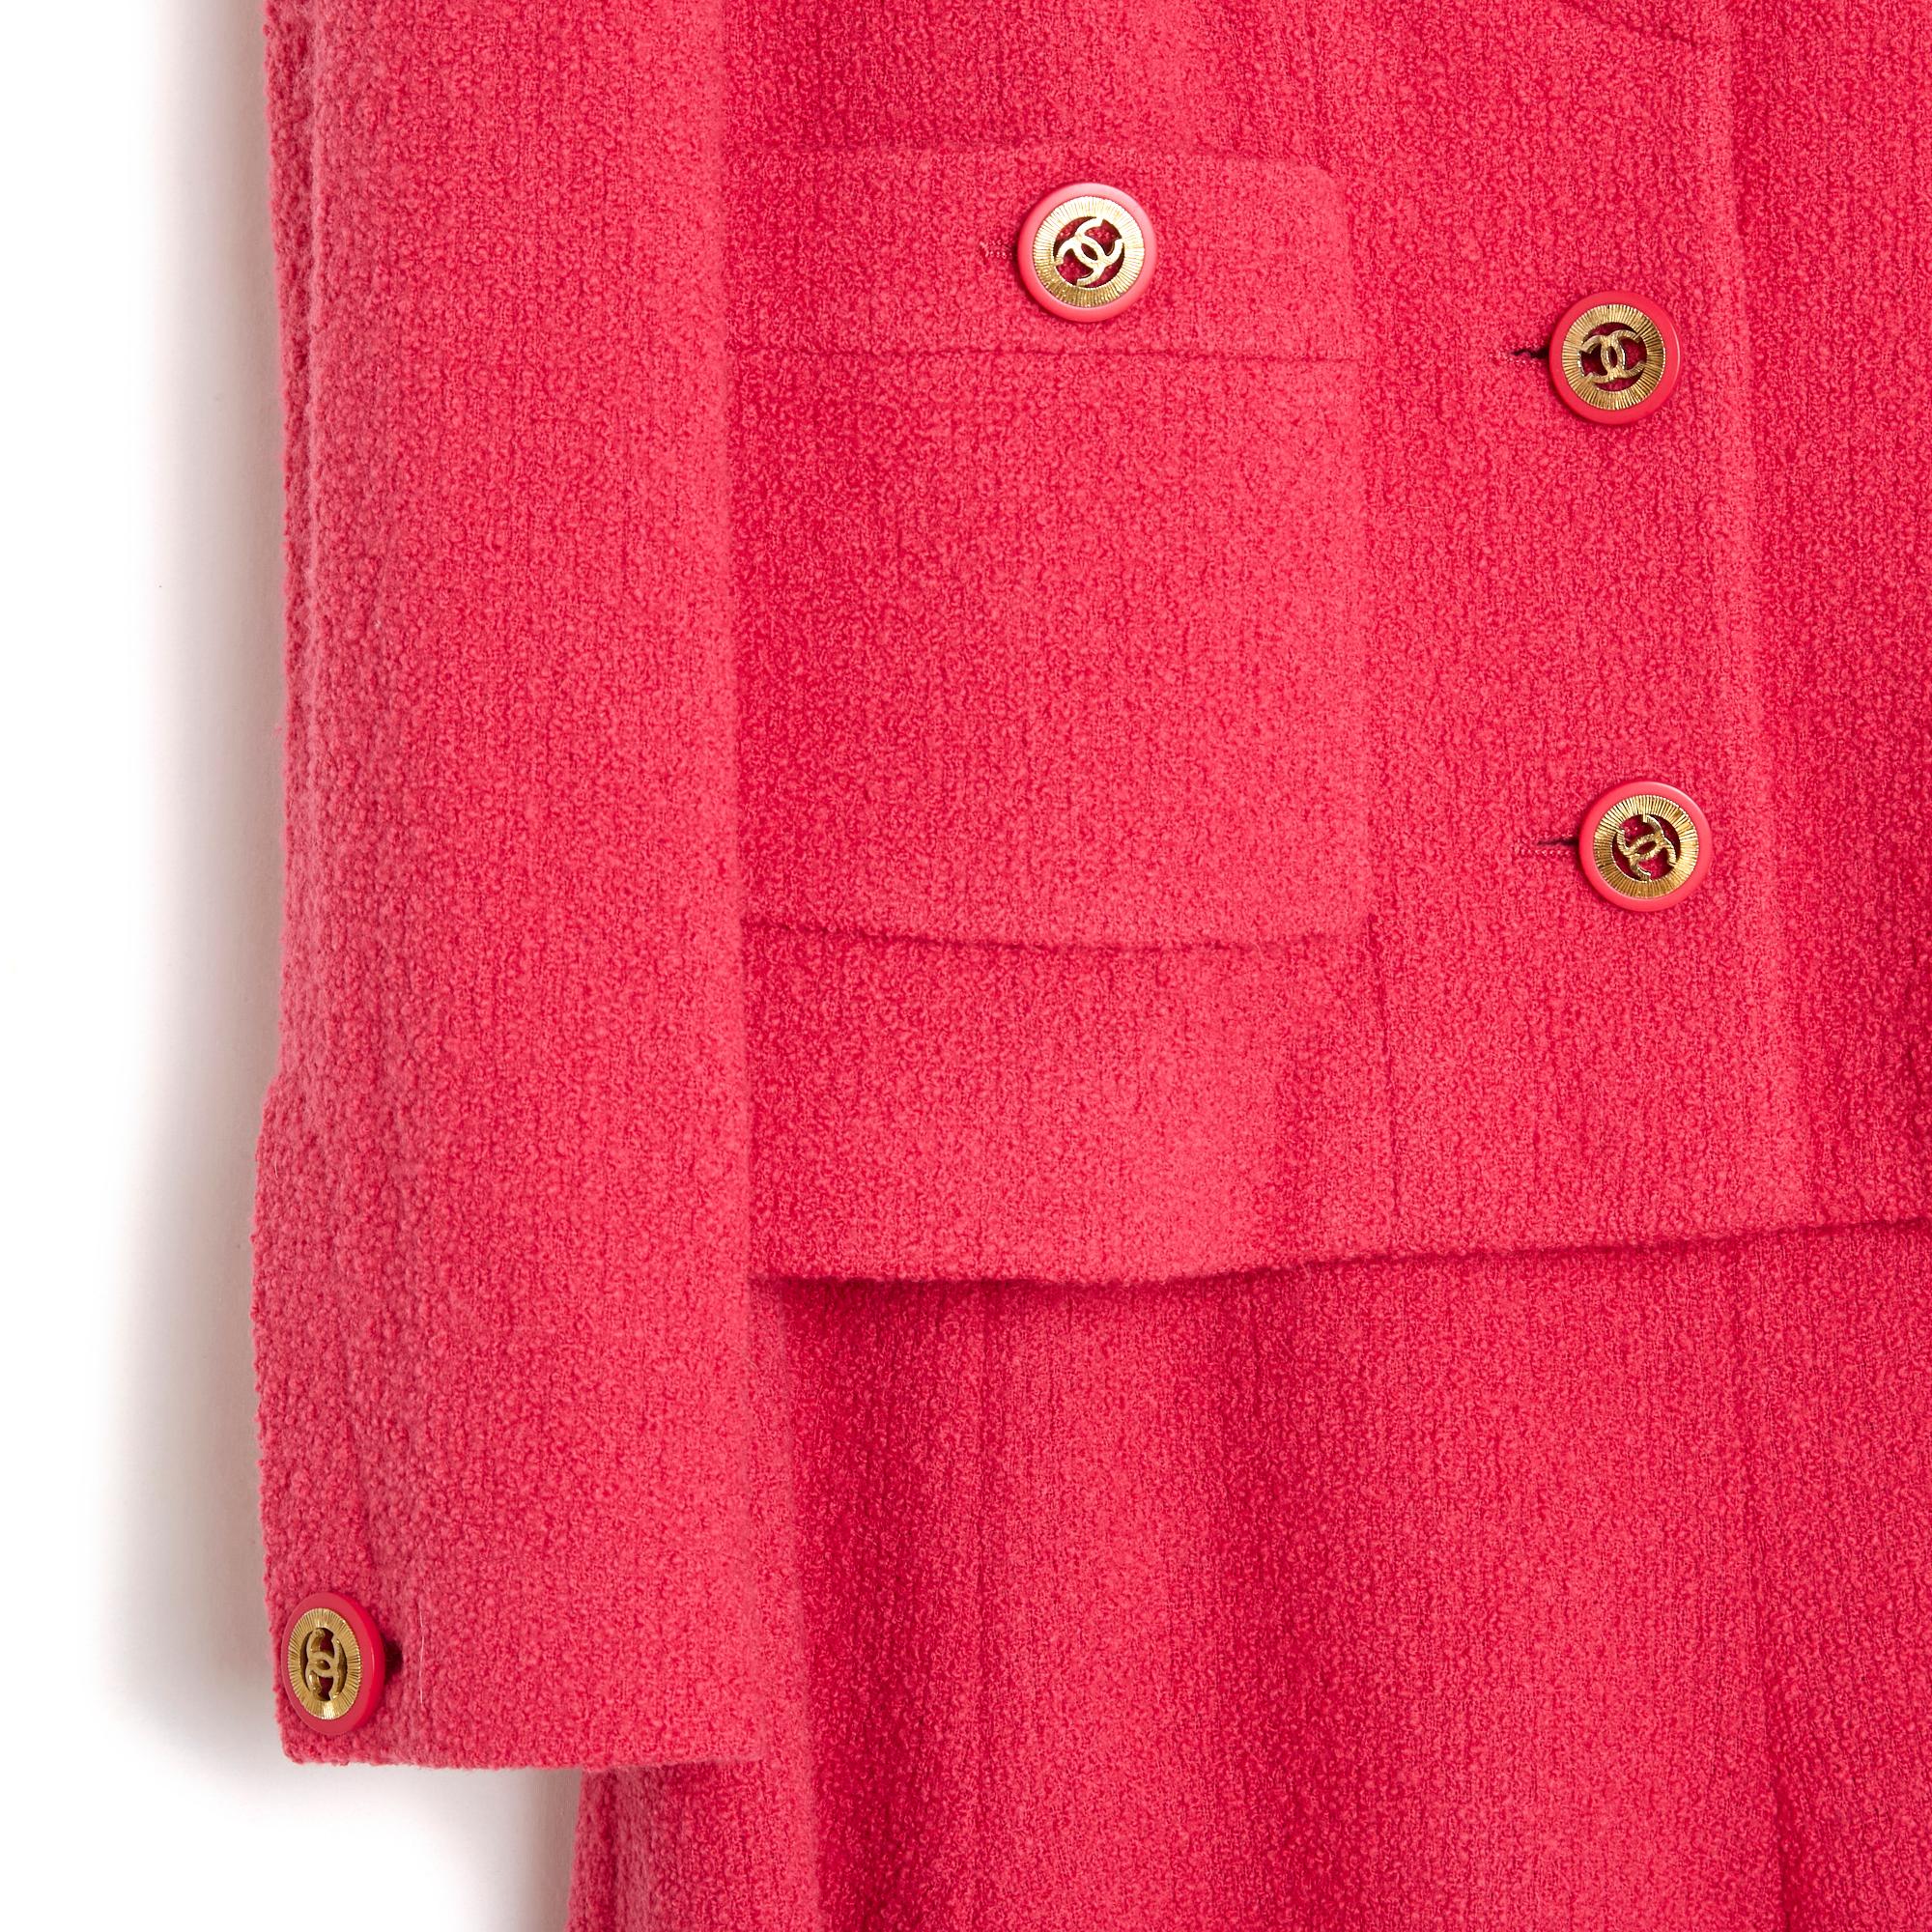 Chanel set by Karl Lagerfeld, Fall Winter 1991 collection, in bright pink wool terry, composed of a jacket, round collar closed with 3 CC-branded buttons, 2 patch pockets closed with a coordinated button, like the long sleeves, flared skirt, closed